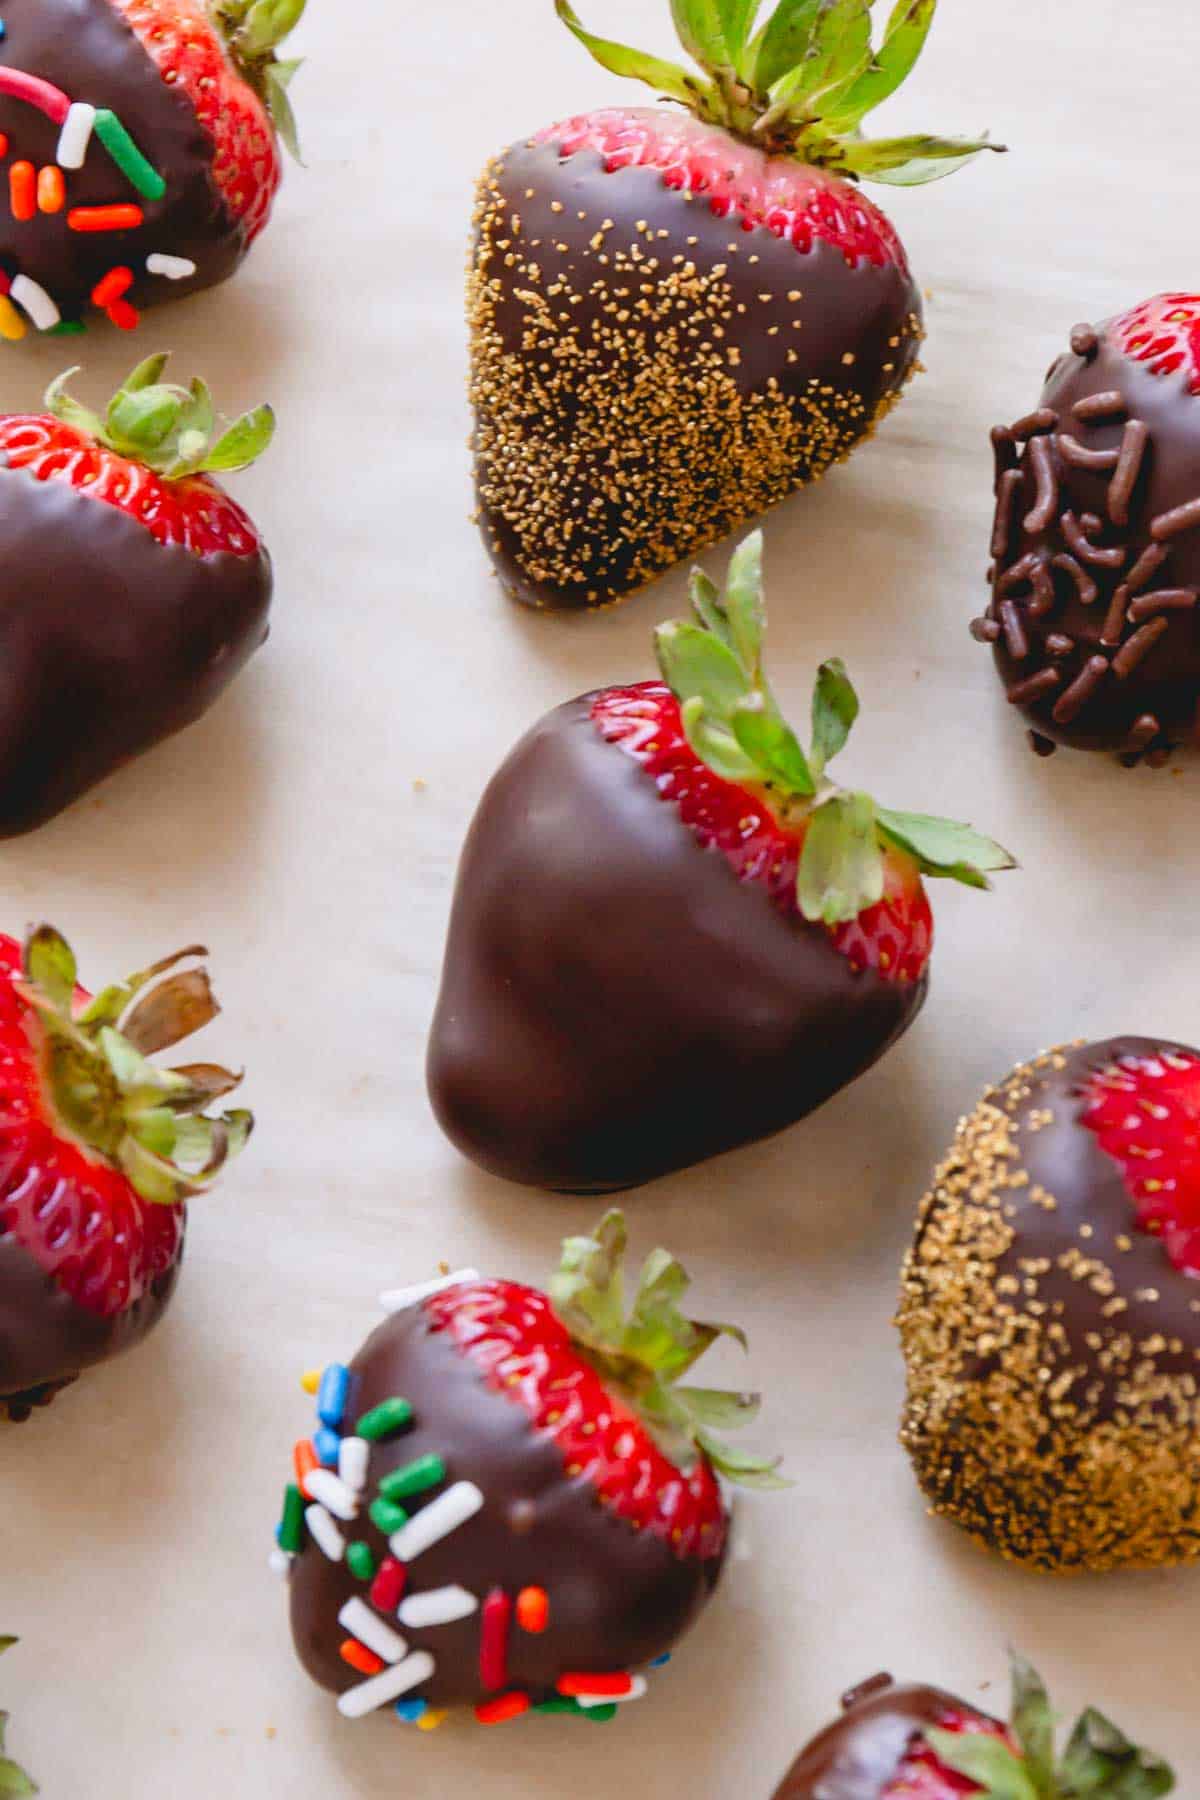 One plain chocolate covered strawberry and others with sprinkles on parchment paper.